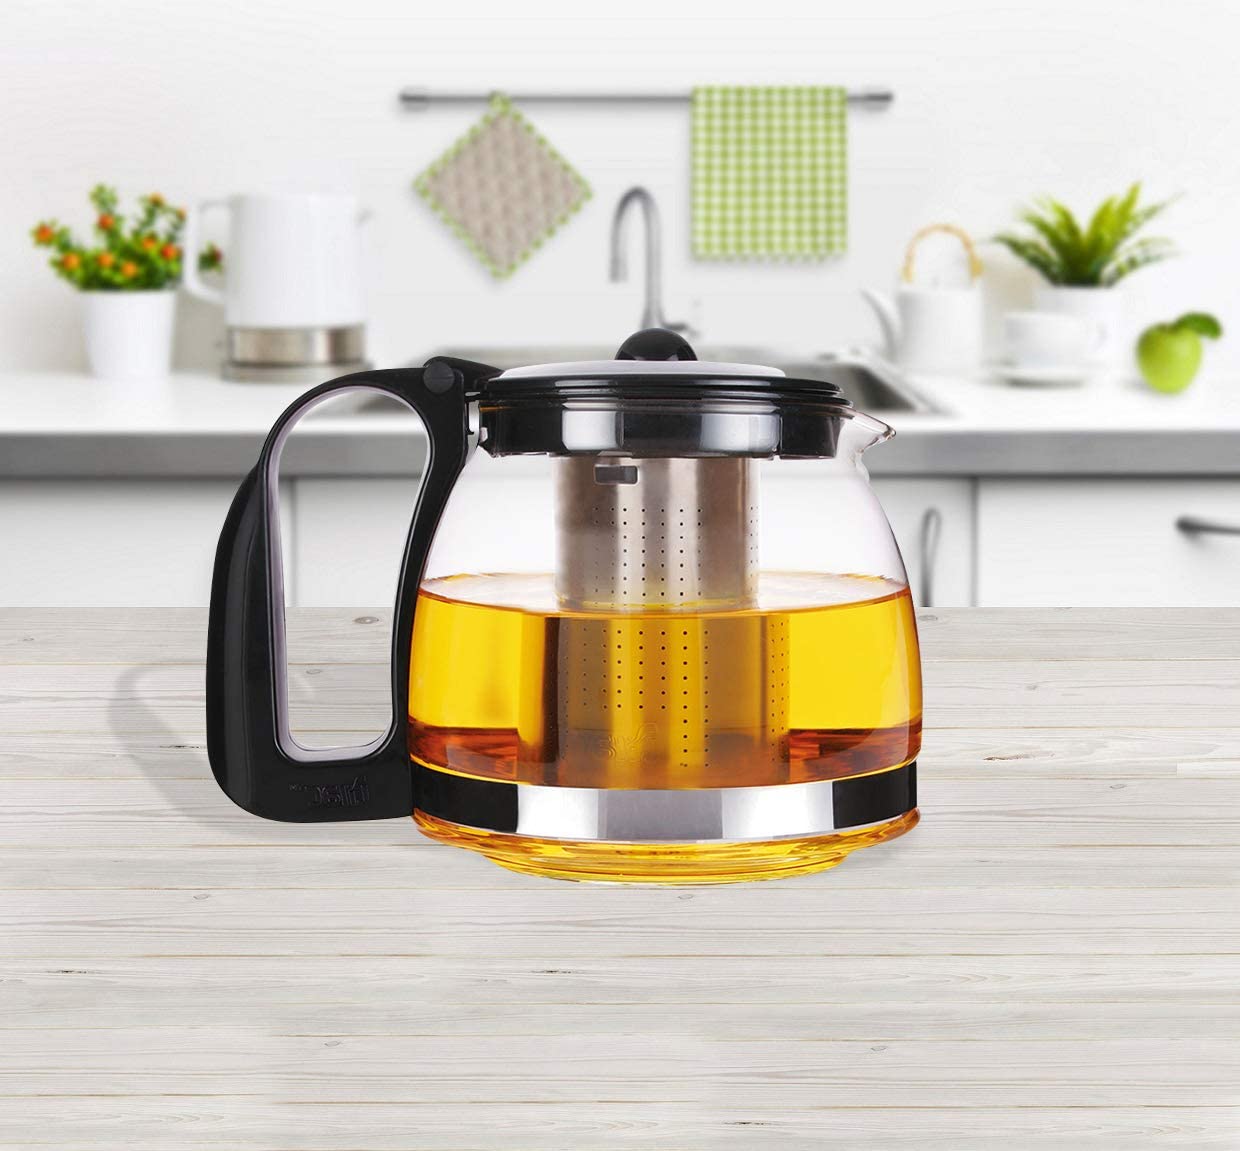 Michelino Glass Teapot with Strainer Insert Removable Stainless Steel Filter Strainer Tea Strainer Heat Resistant Glass Jug with Plastic Lid and Handle